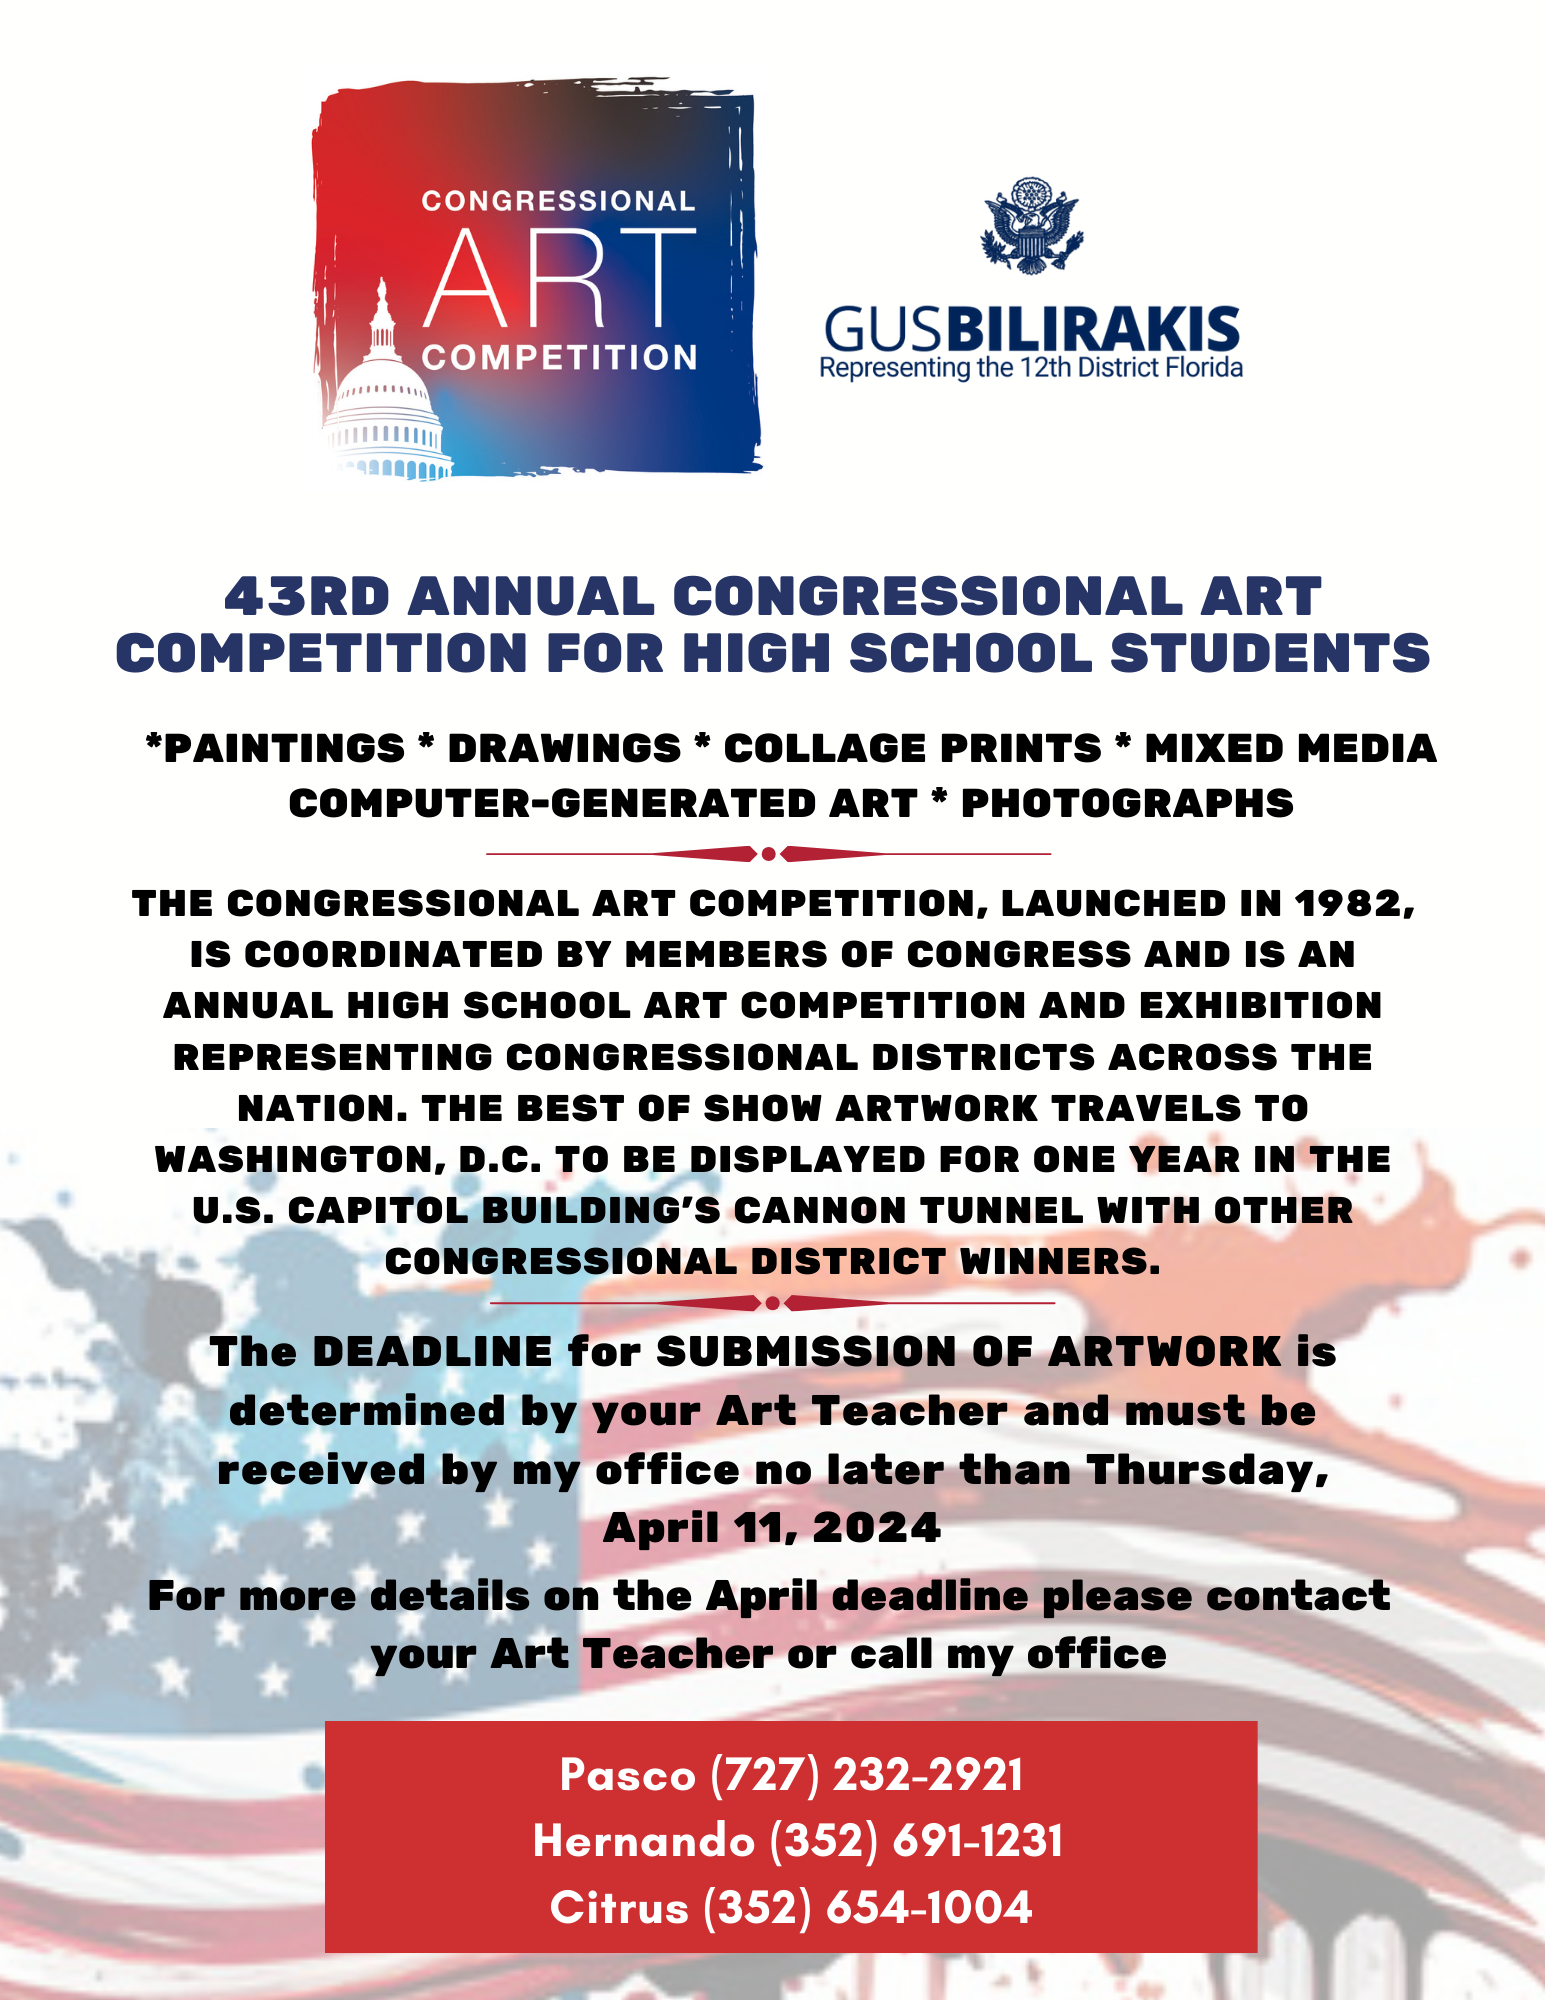 Congression Art Competition Flyer 2024.png